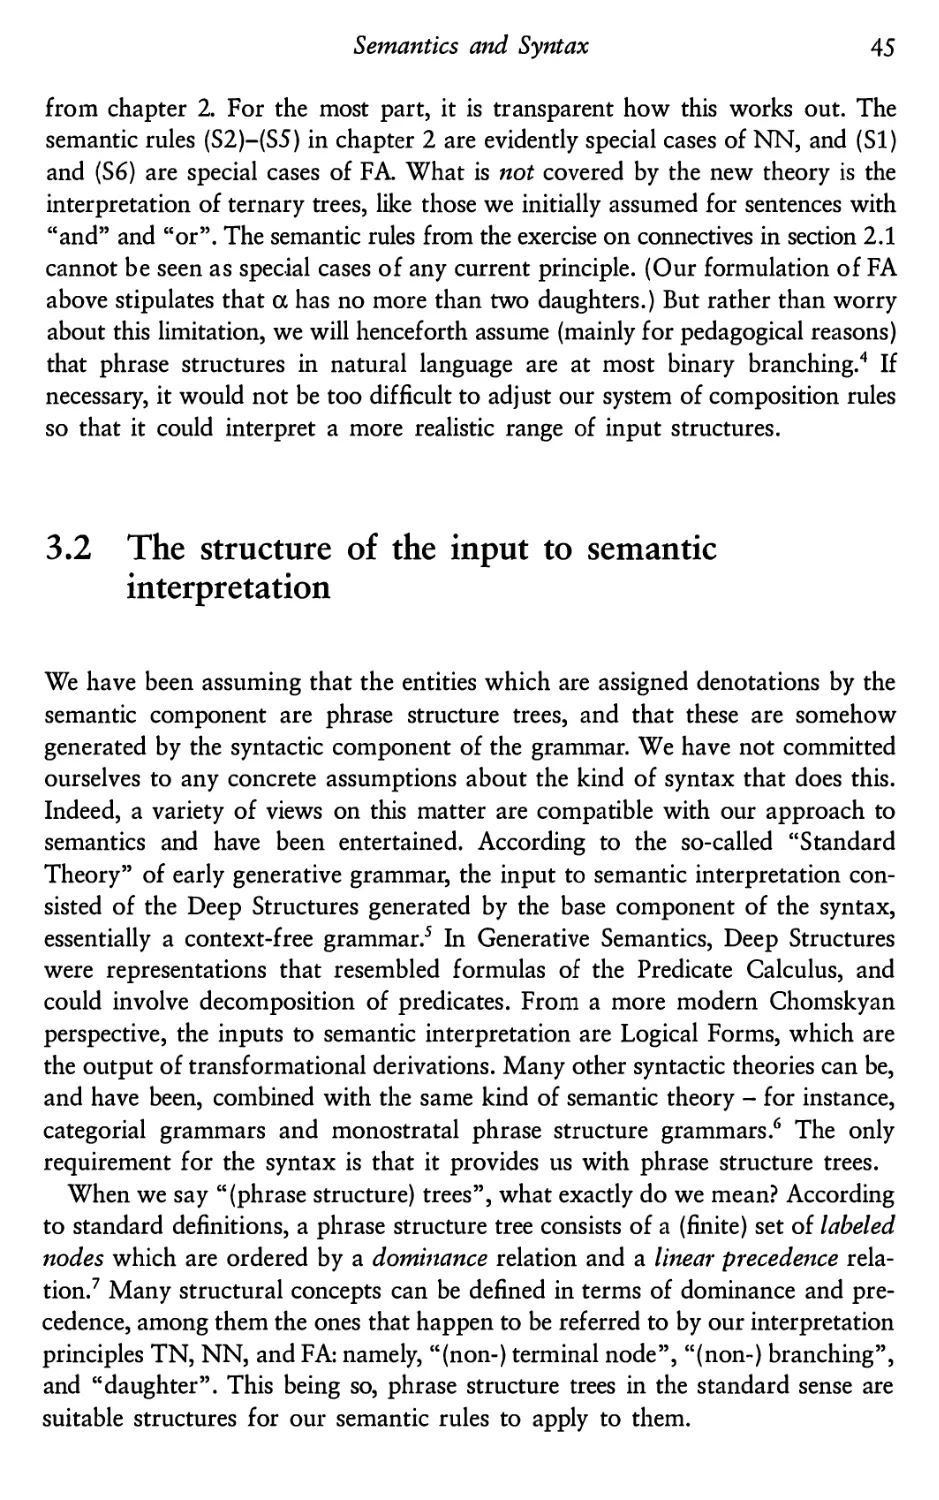 3.2 The structure of the input to semantic interpretation